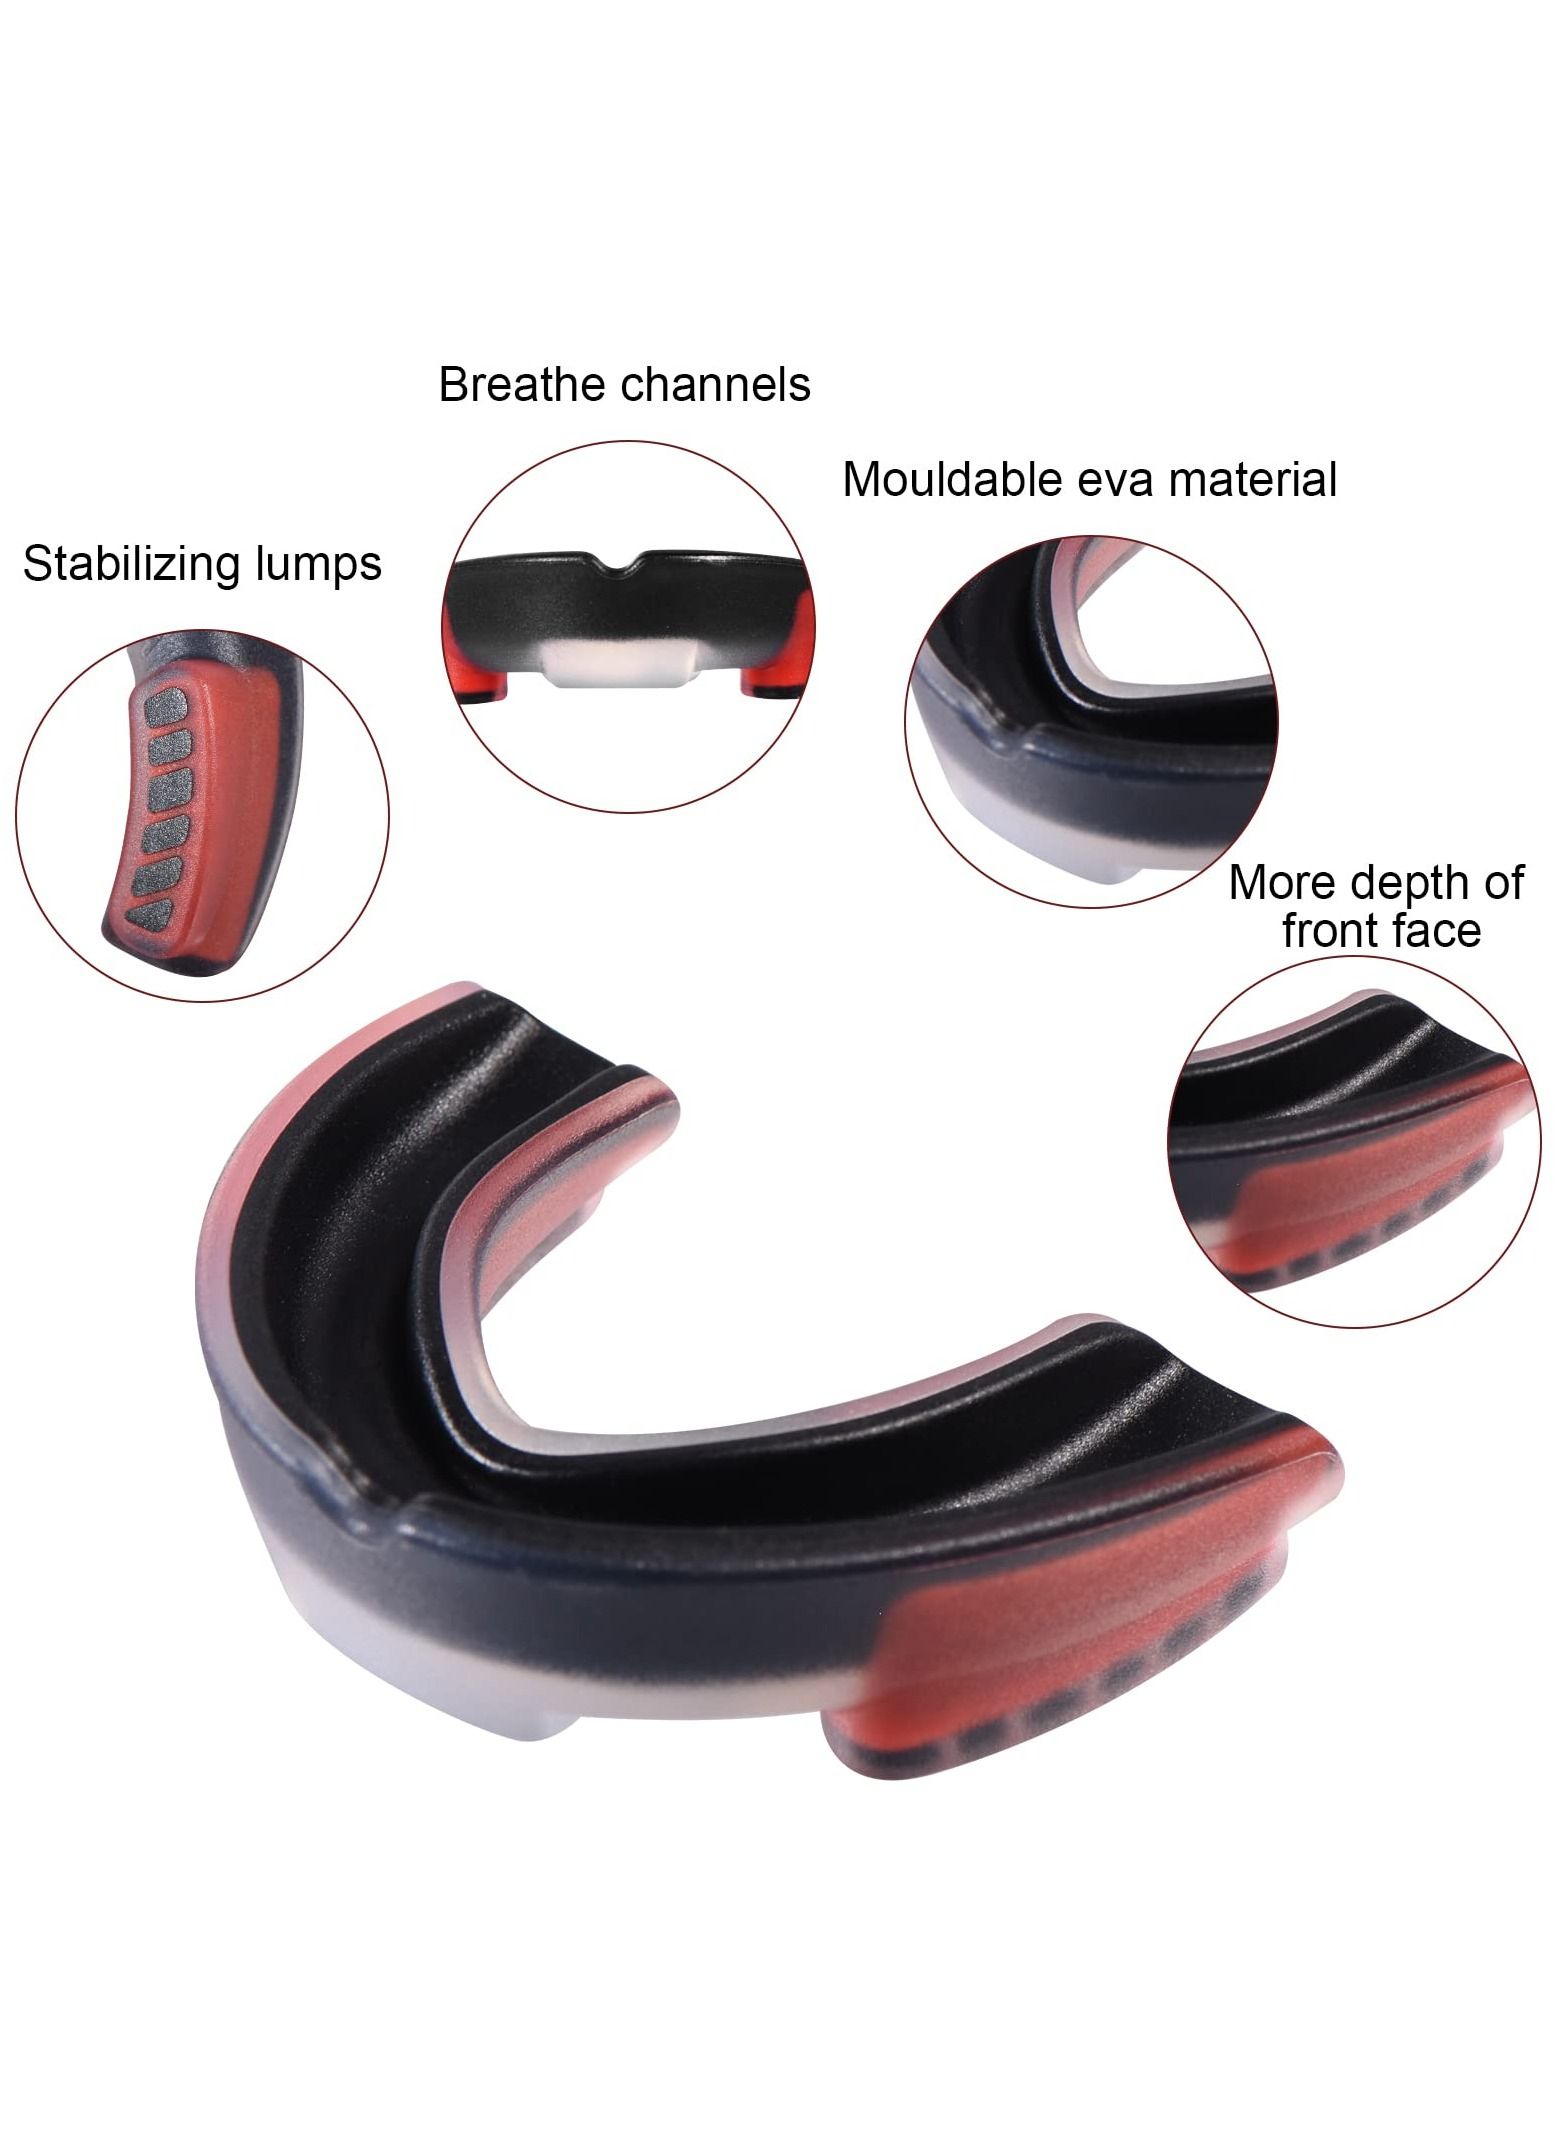 Sports Mouthguard for Soccer, Basketball, Lacrosse, Field Hockey, Mixed Martial Arts, Boxing, Jiu-Jitsu, Breathable Mouthguard for Adults and Teens 